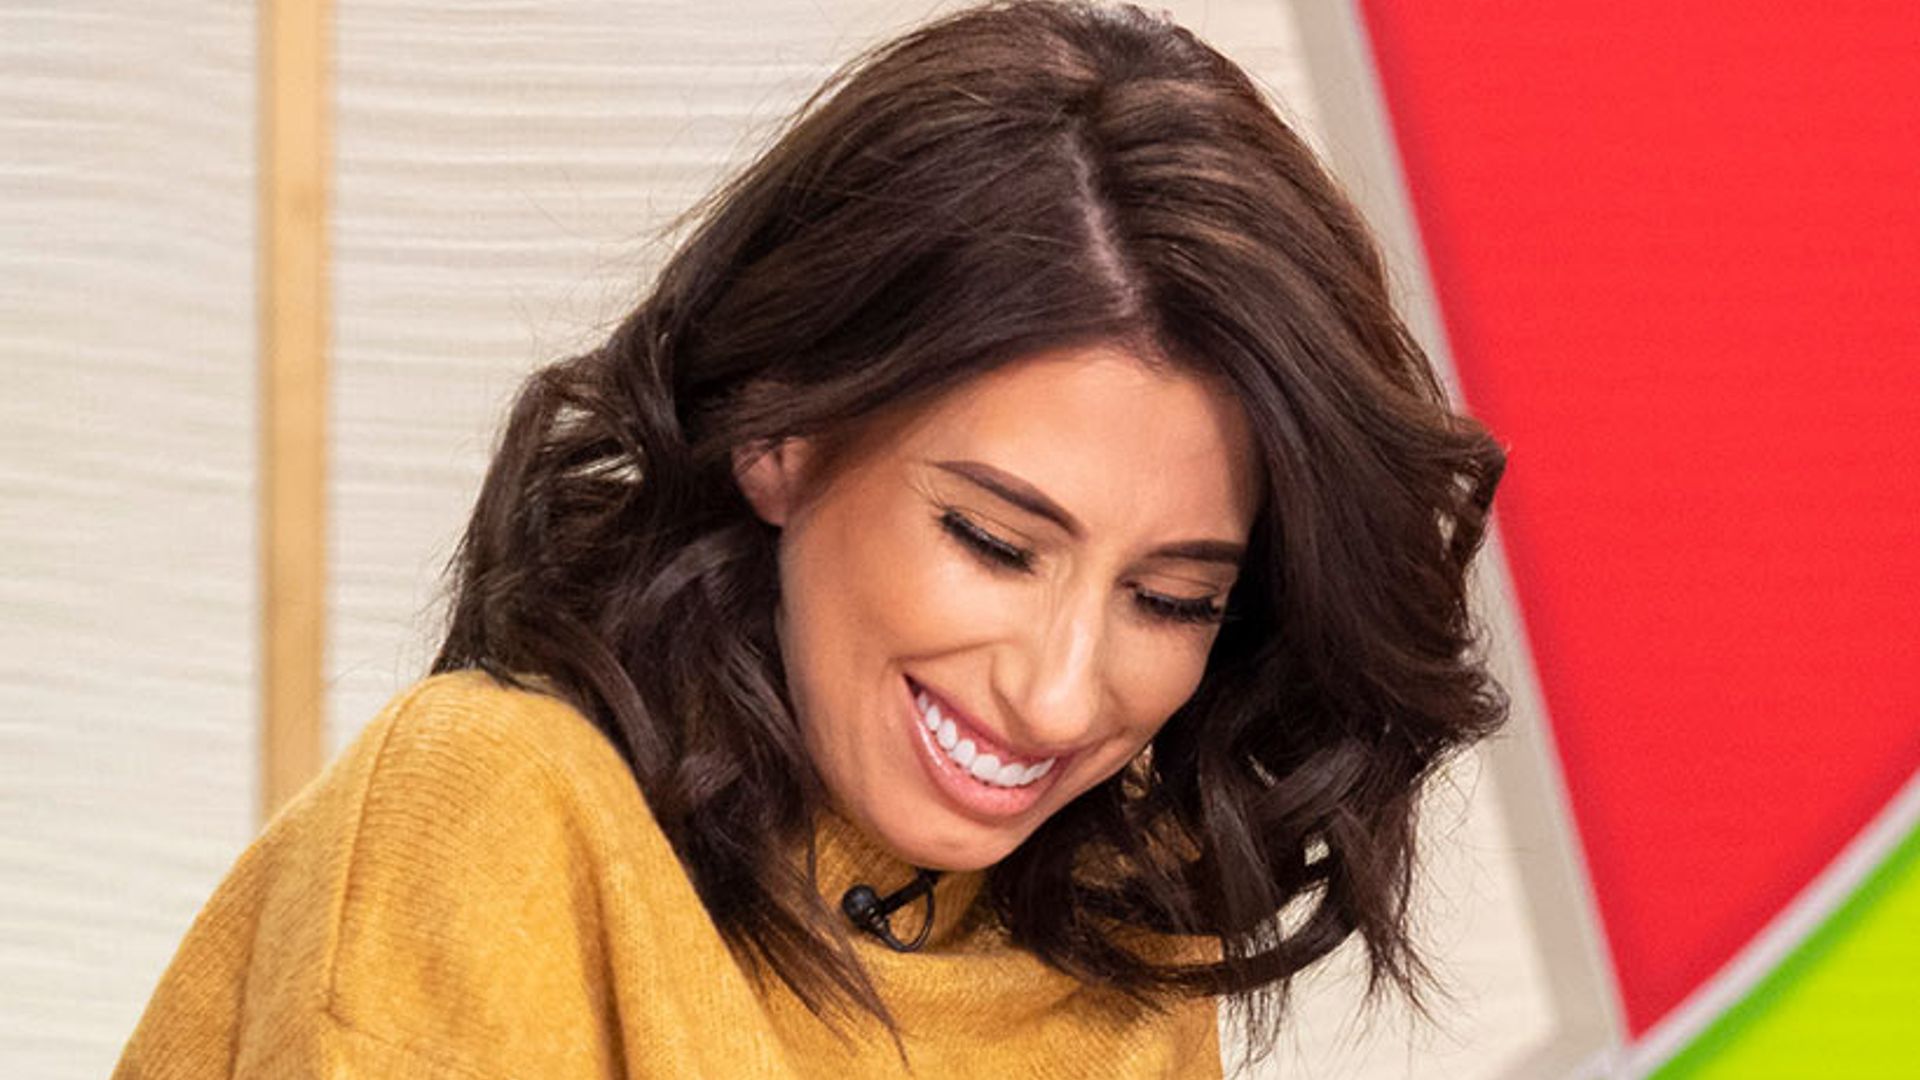 Stacey Solomon's £20 jumper dress she wore on Loose Women is from